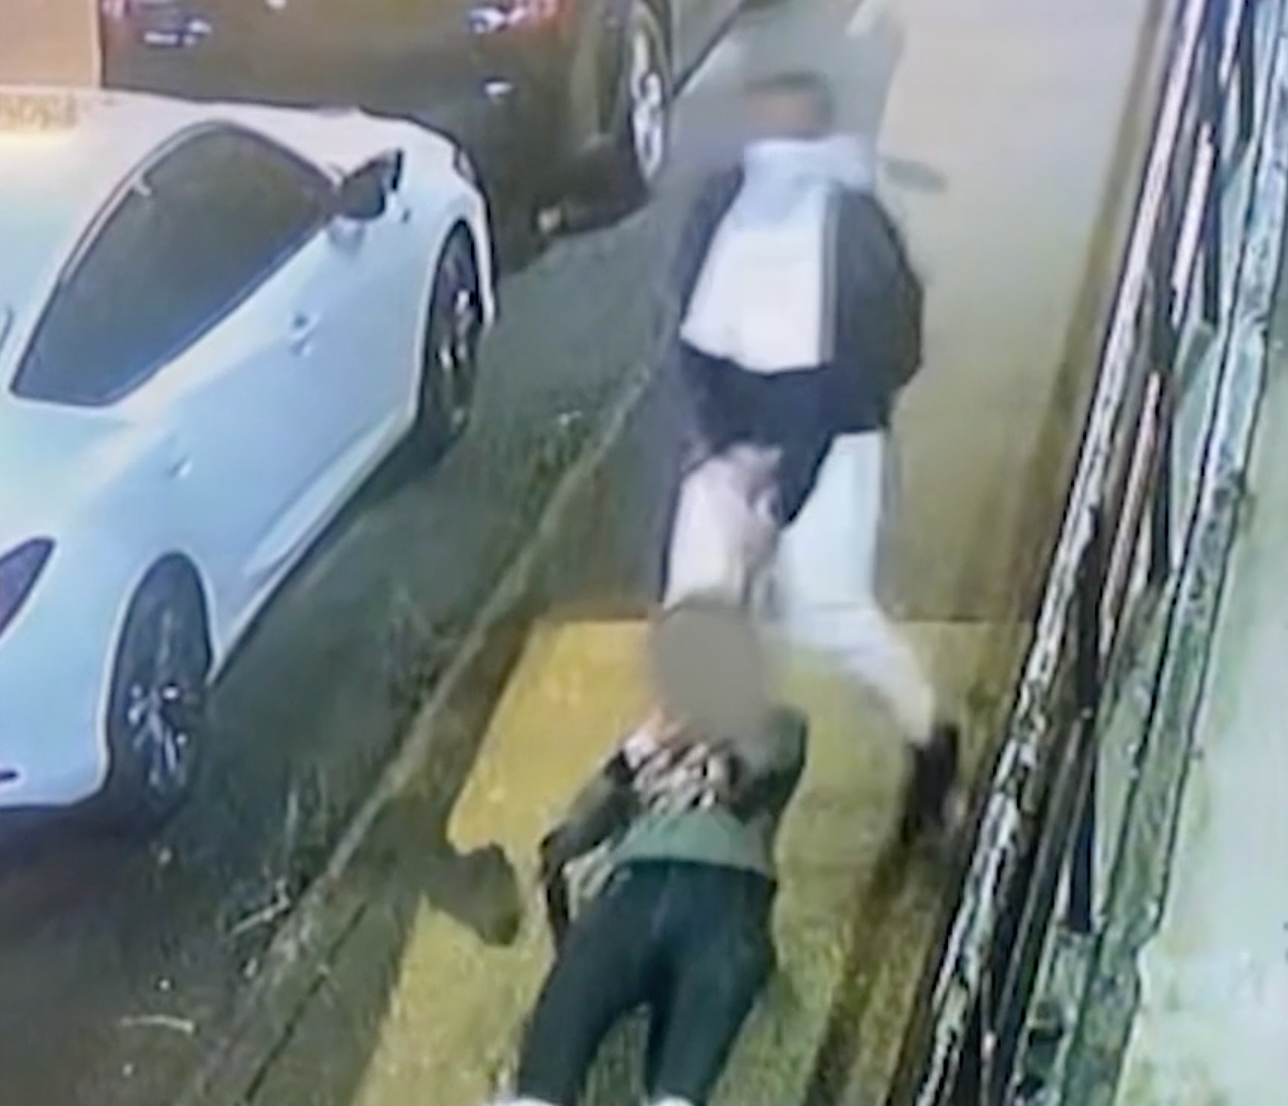 Disturbing video shows the suspect lassoing the woman and dragging her down the street in the Bronx